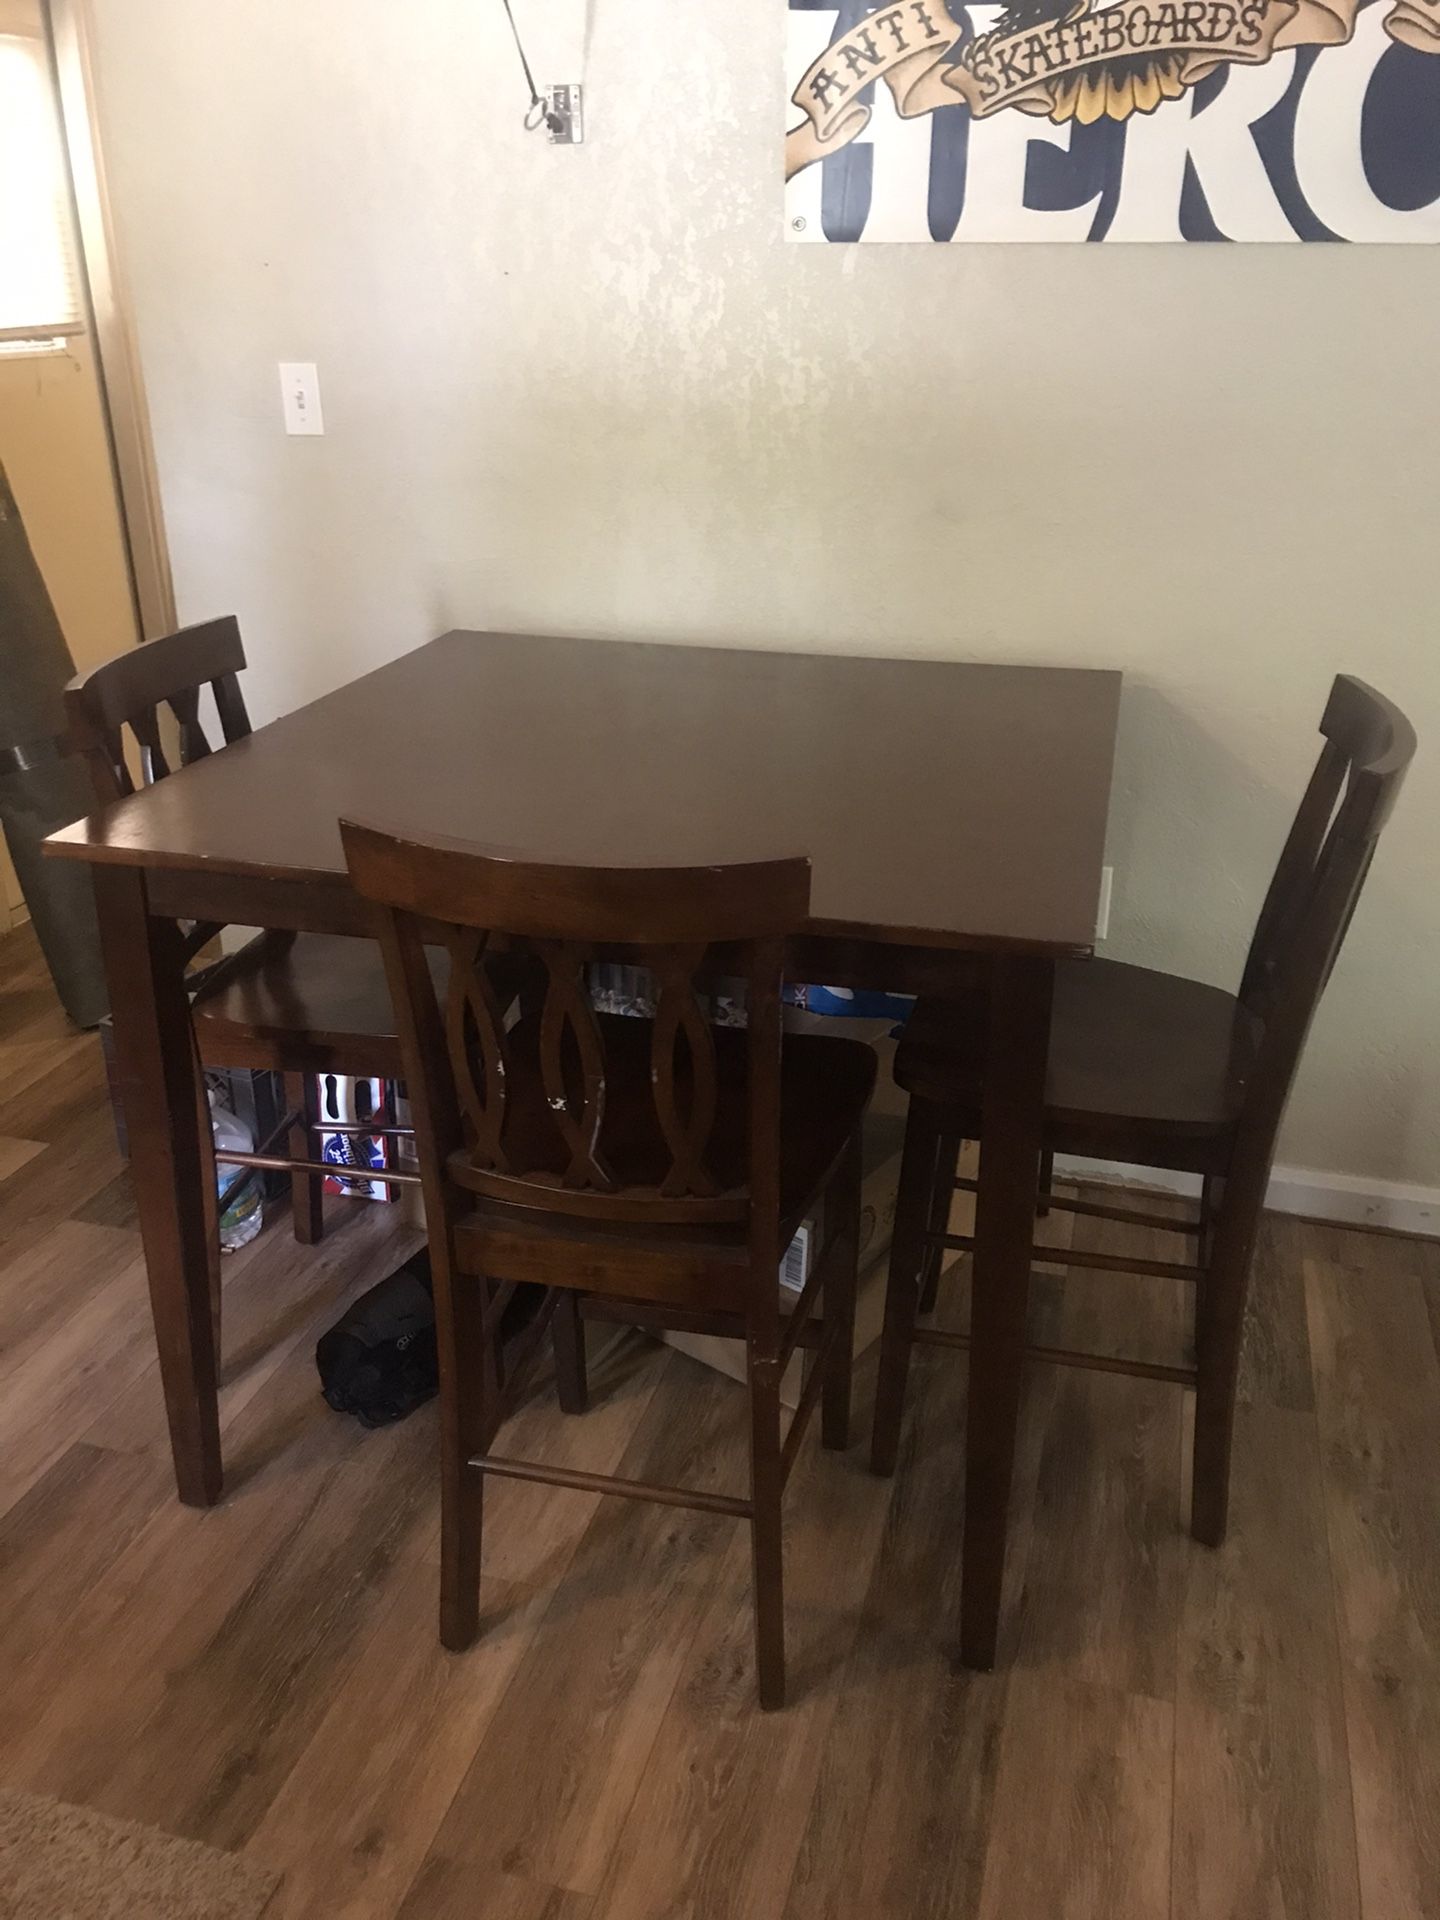 Dining Room Table + 3 Barstool Chairs